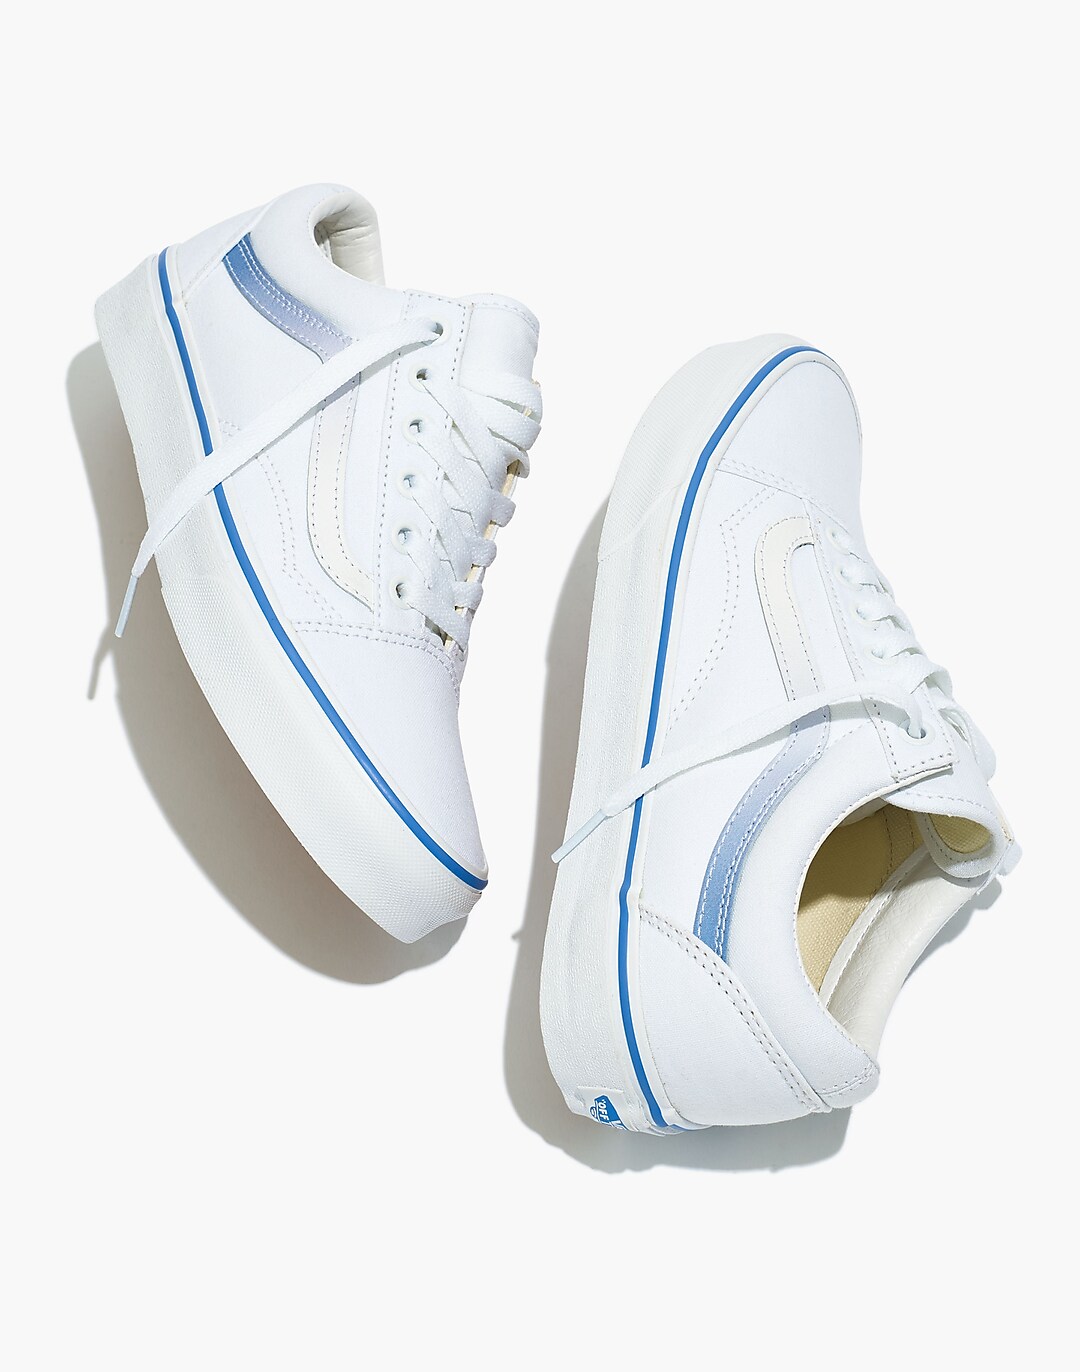 Concurso tiburón manual Madewell x Vans® Unisex Old Skool Lace-Up Sneakers in Ombre Stripe Canvas